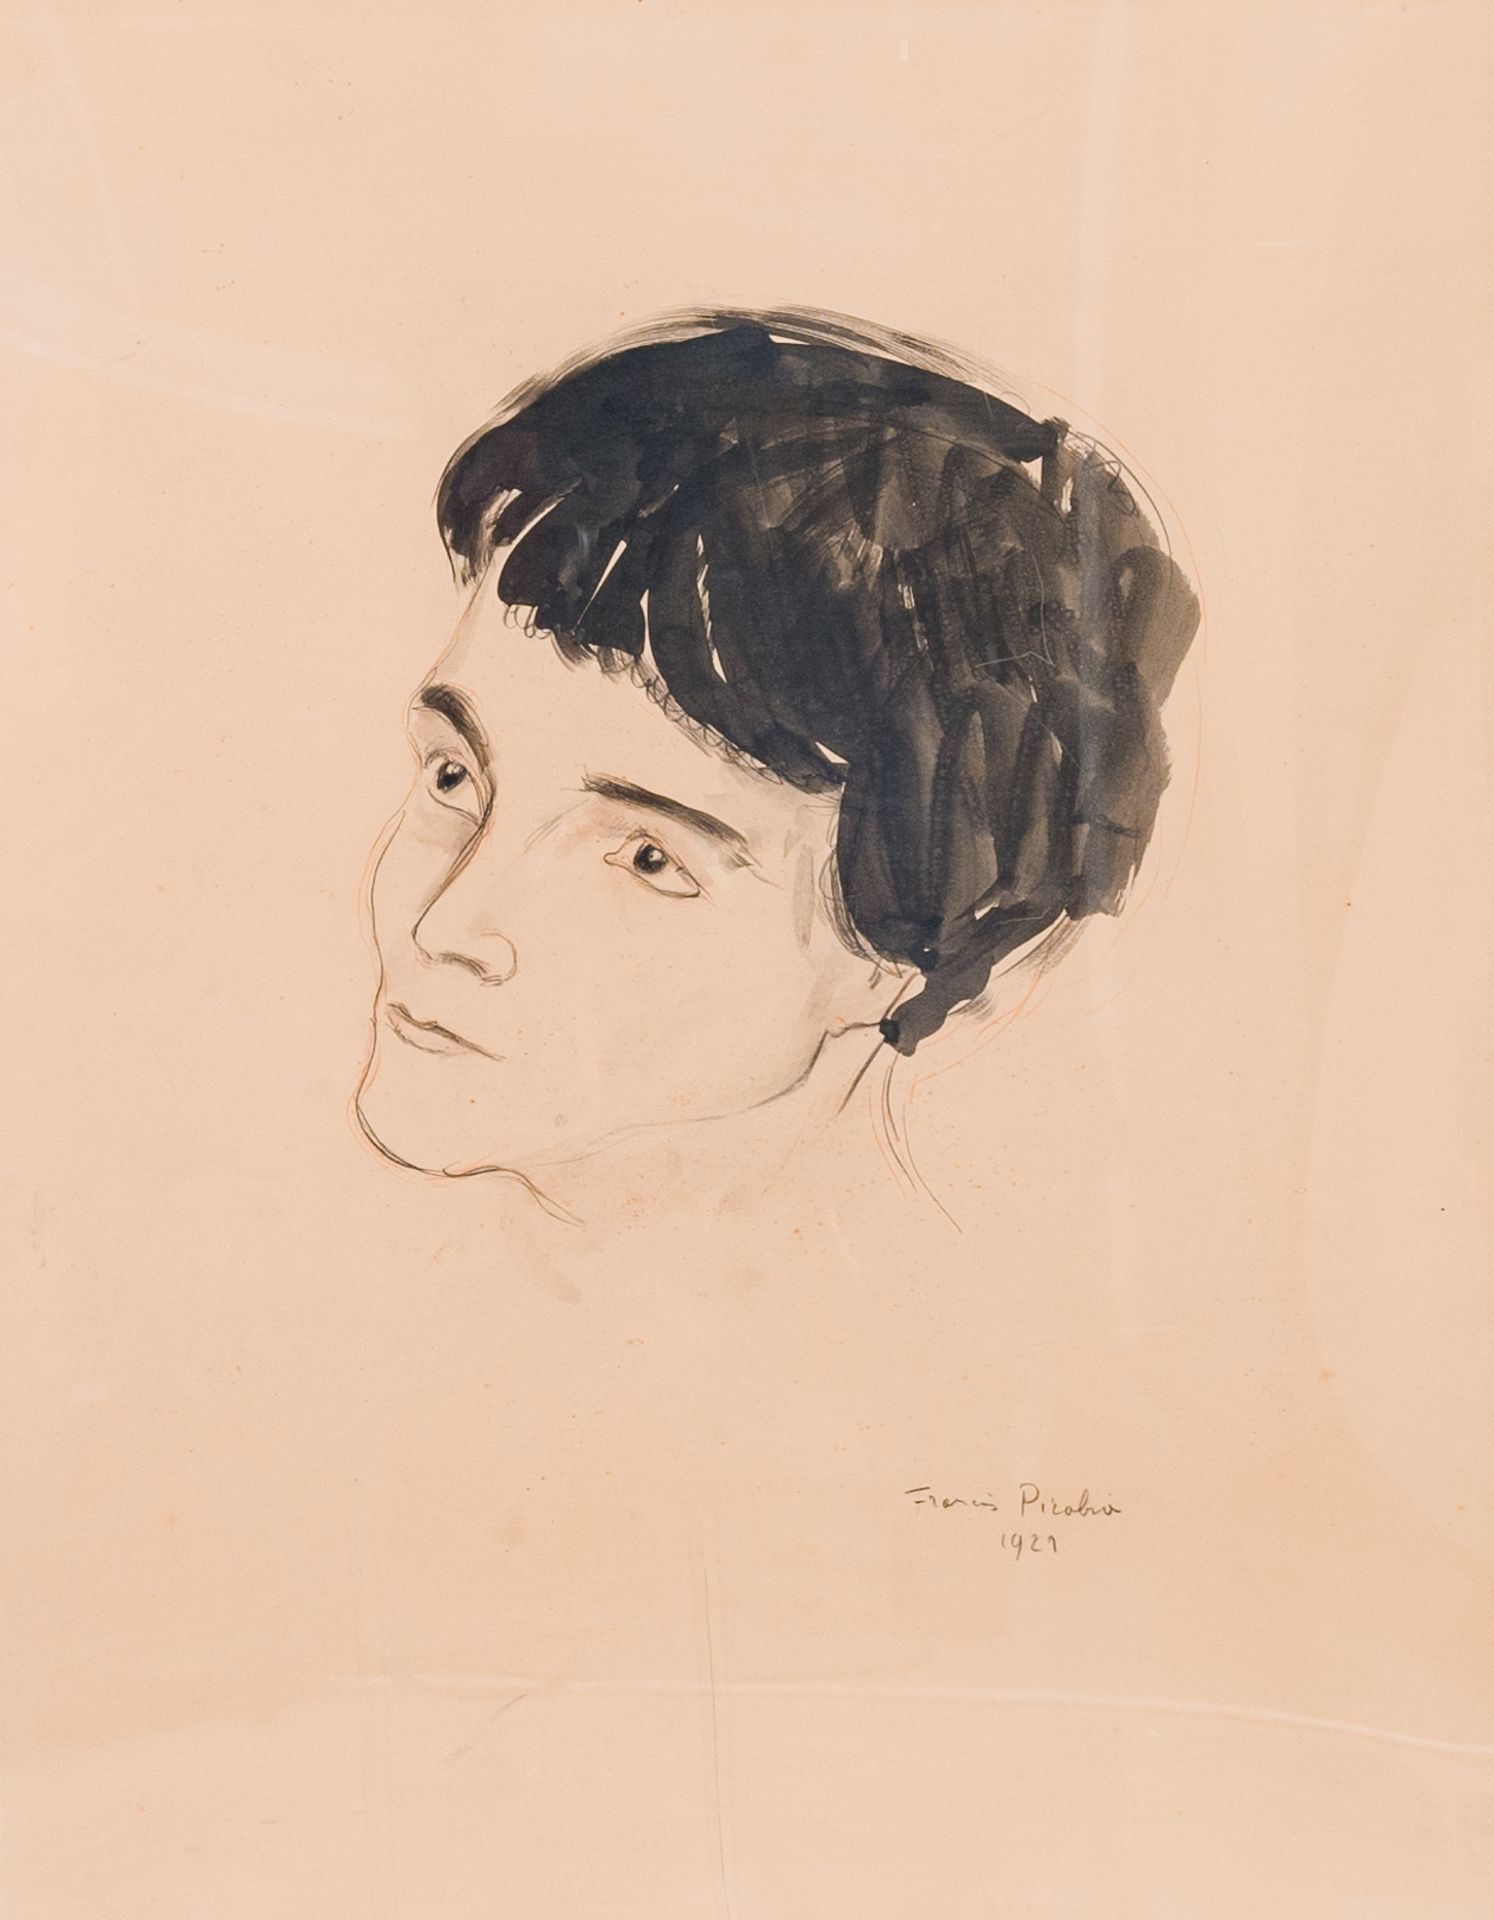 Francis Picabia (1879-1953): 'Head of a young woman', pencil and watercolor drawing, dated 1921 - Image 6 of 14